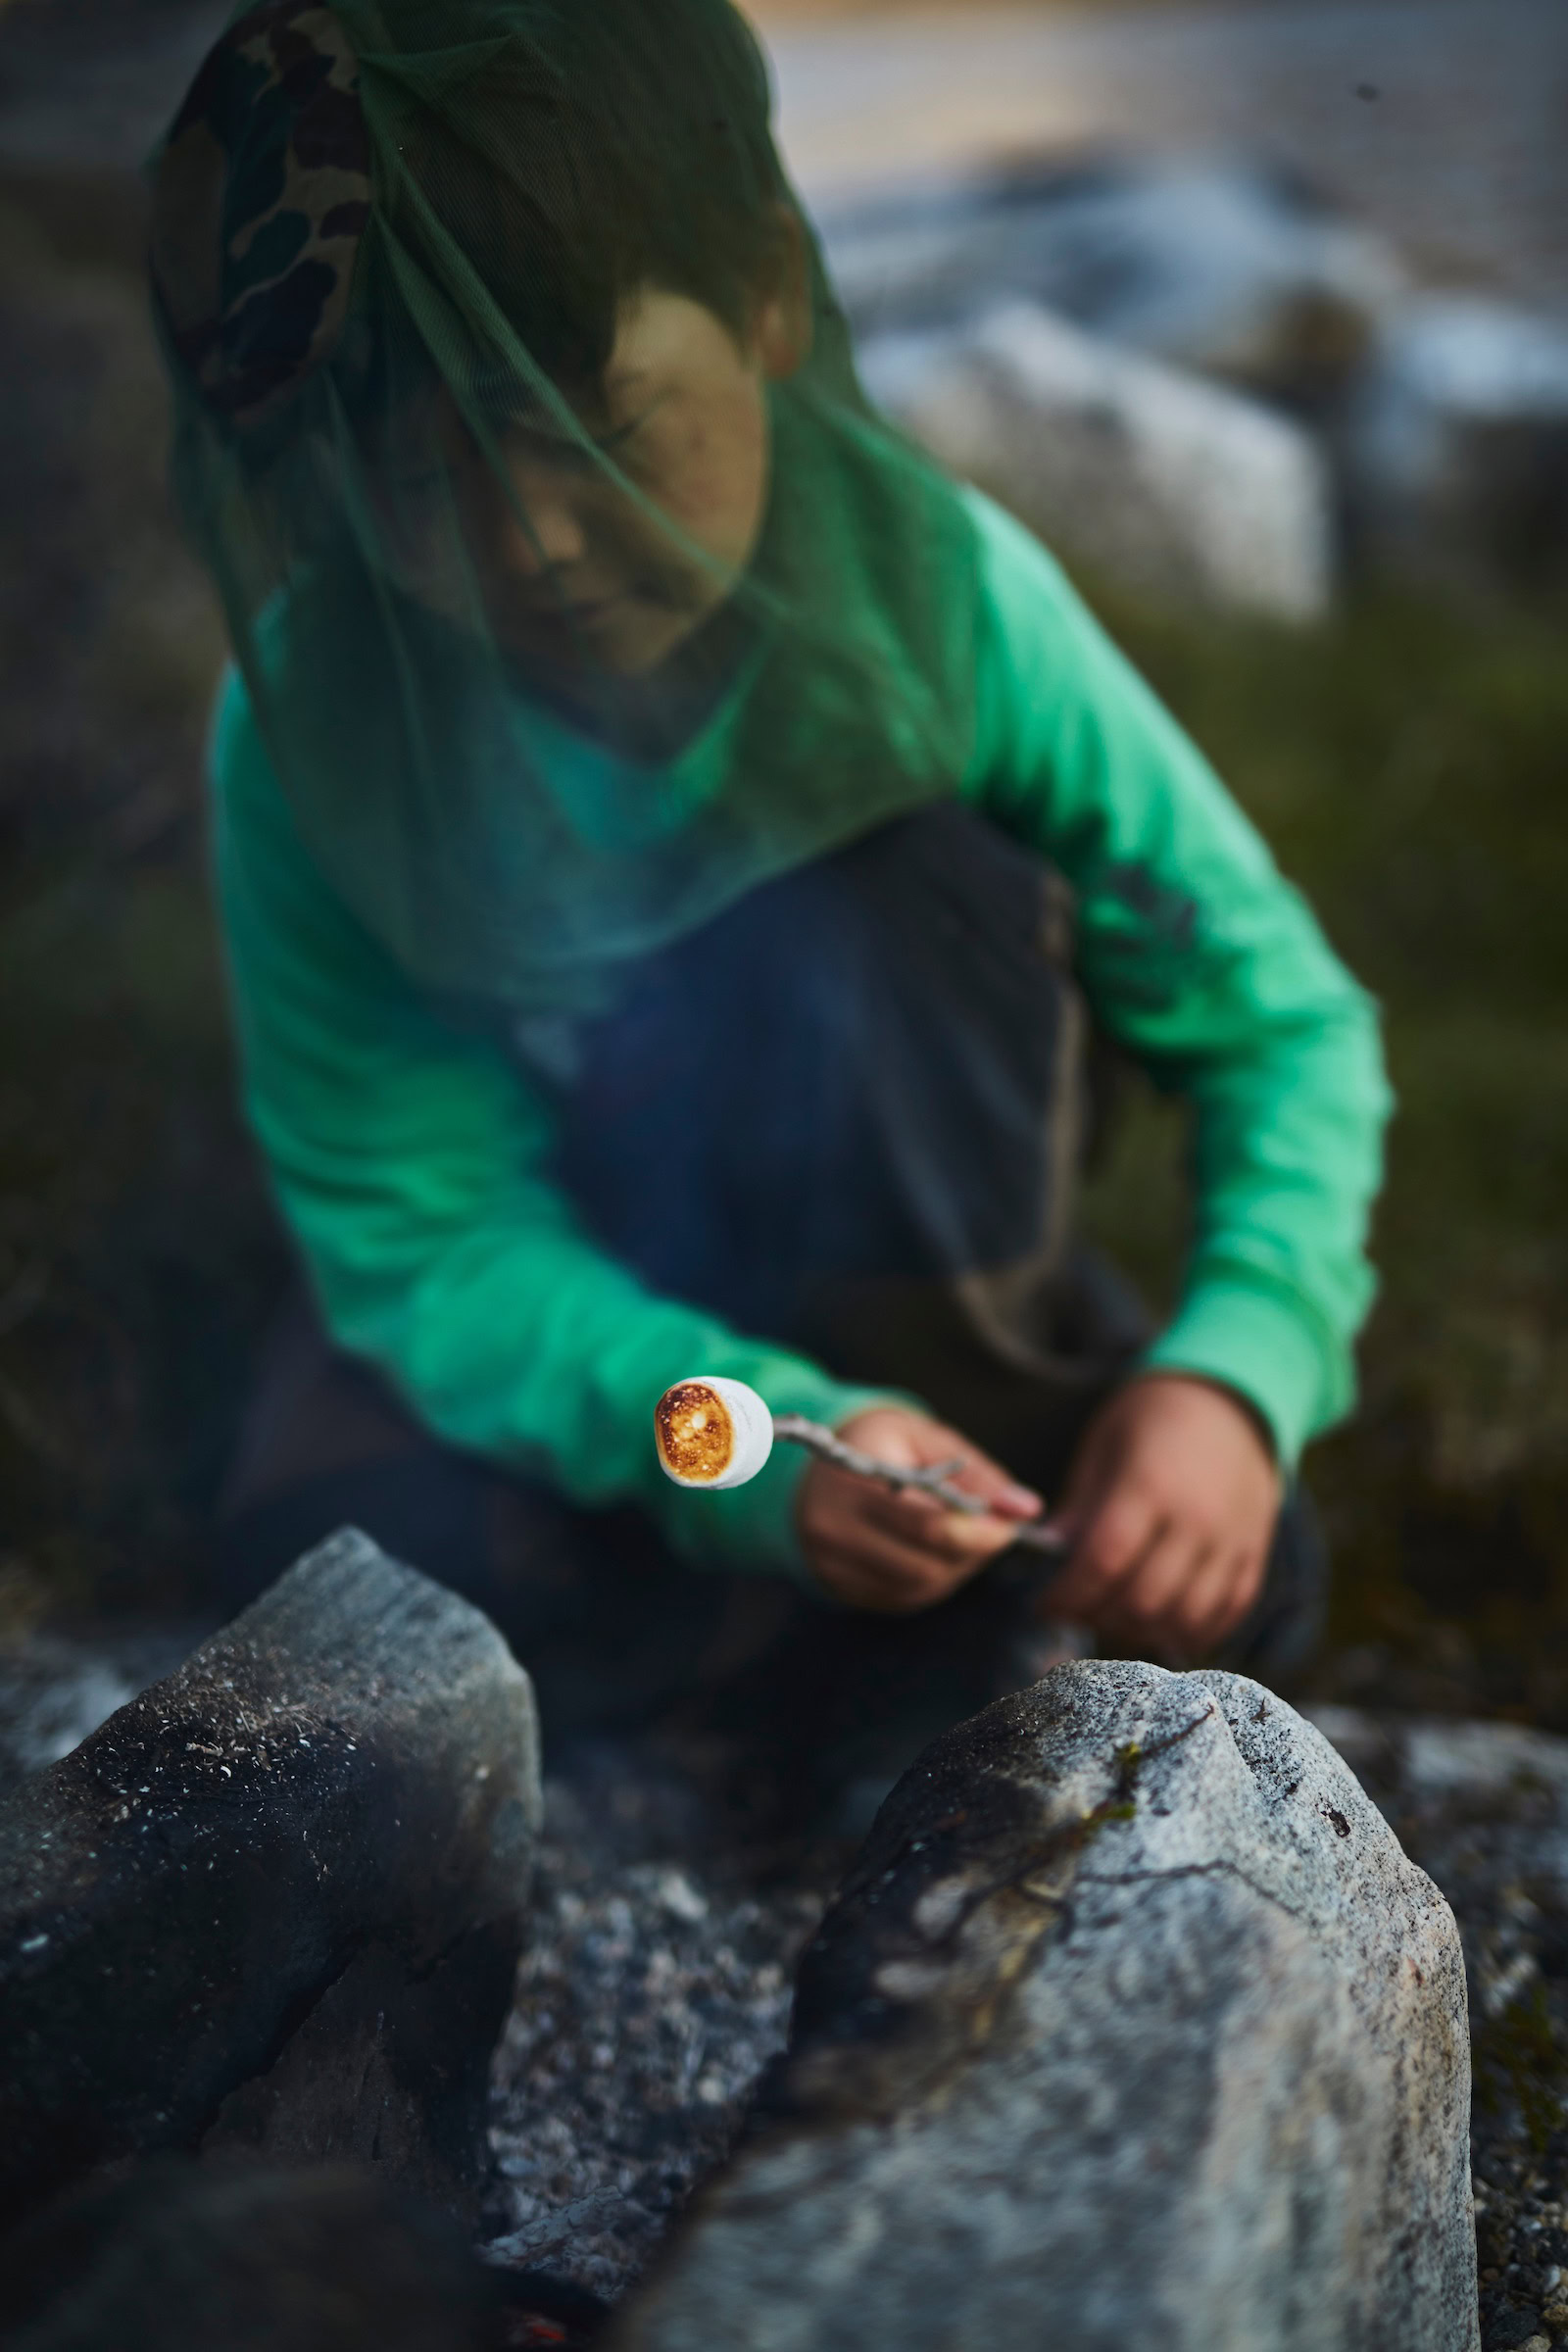 A boy roasting a marshmallow over a bonfire in Nuuk